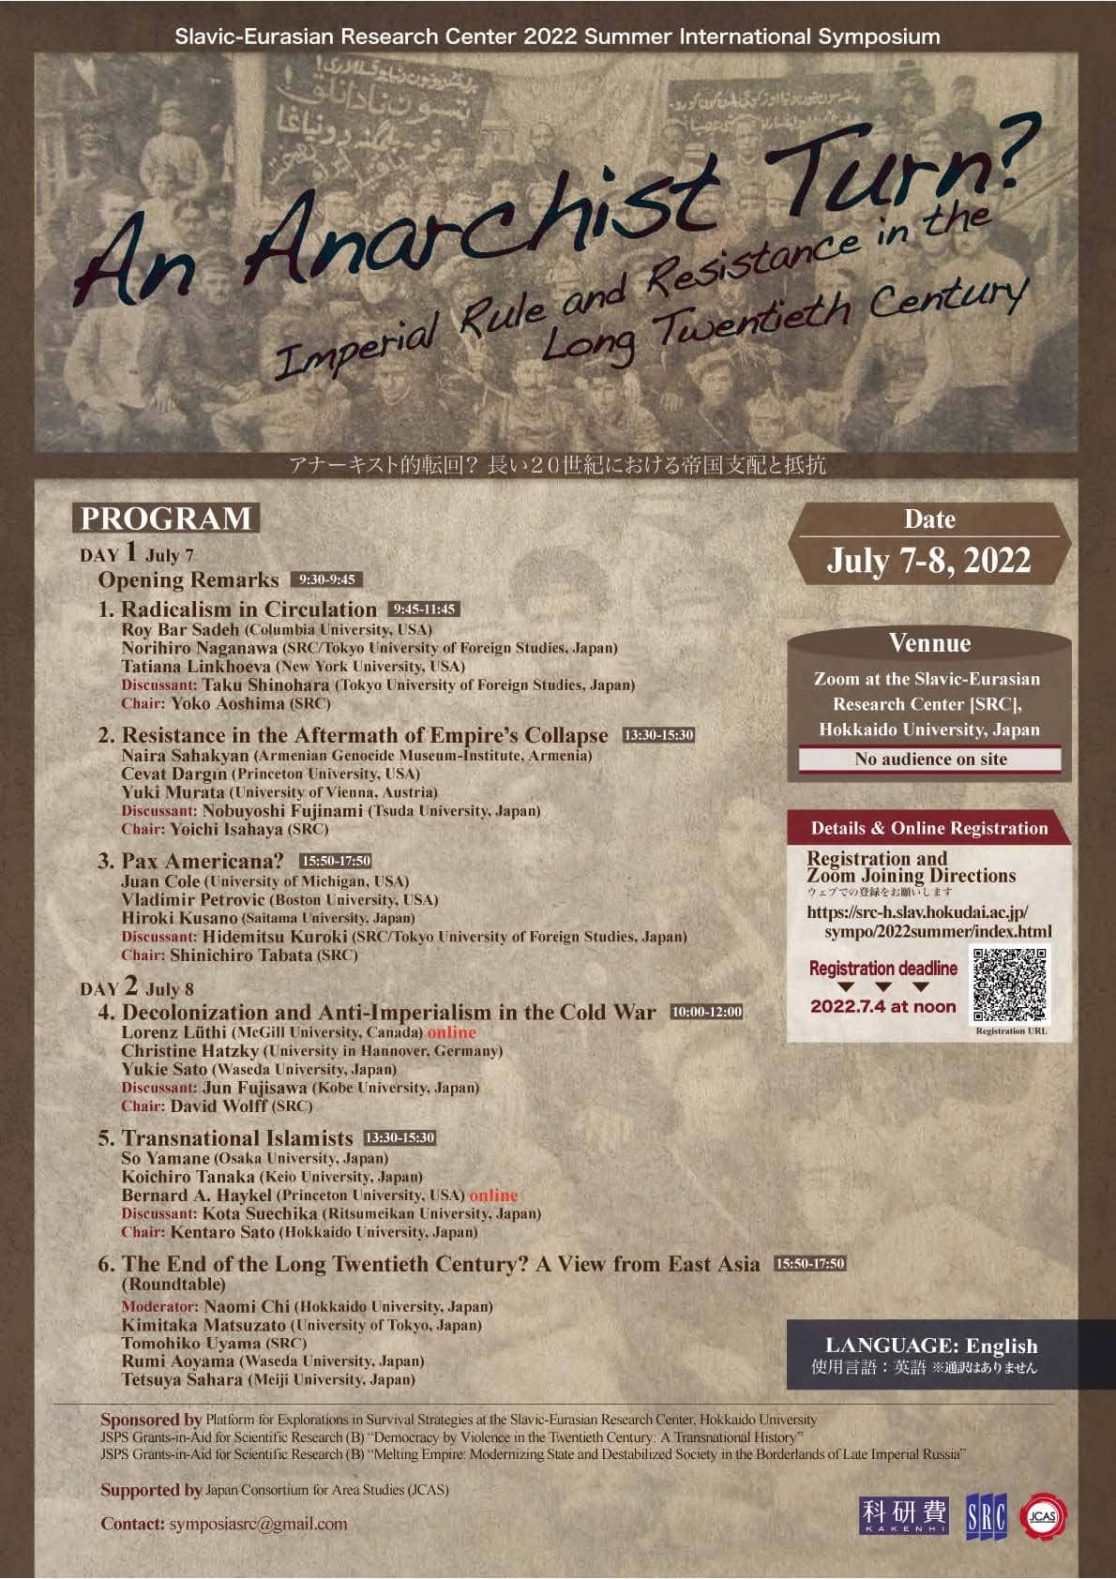 Slavic-Eurasian Research Center 2022 Summer International Symposium An Anarchist Turn? Imperial Rule and Resistance in the Long Twentieth Century